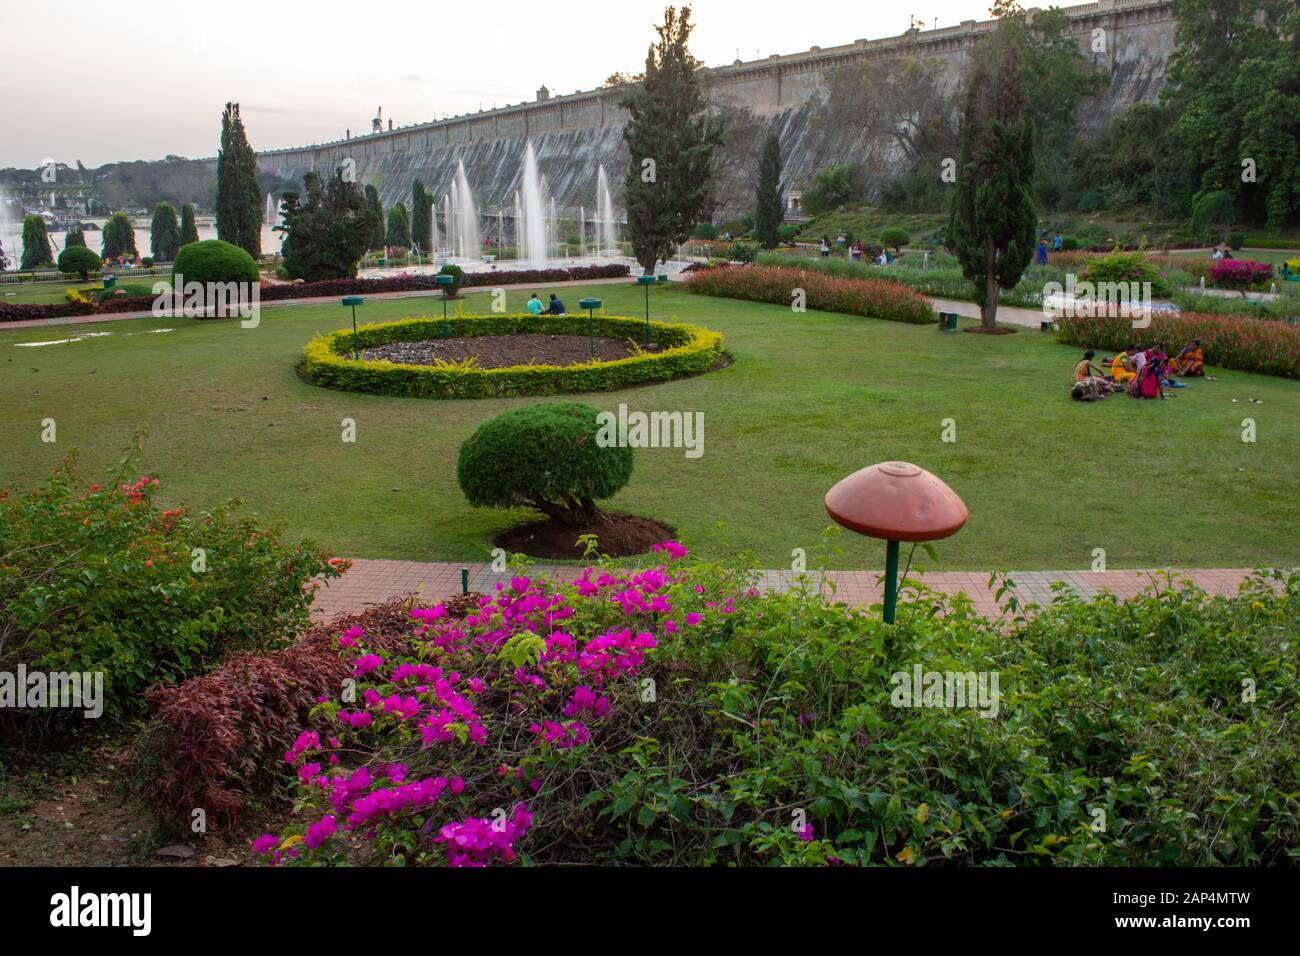 Mysore, Karnataka / India - January 01 2020: Beautiful landscaped garden with water fountains in Brindavan Gardens during sunset with KRS dam in backg Stock Photo